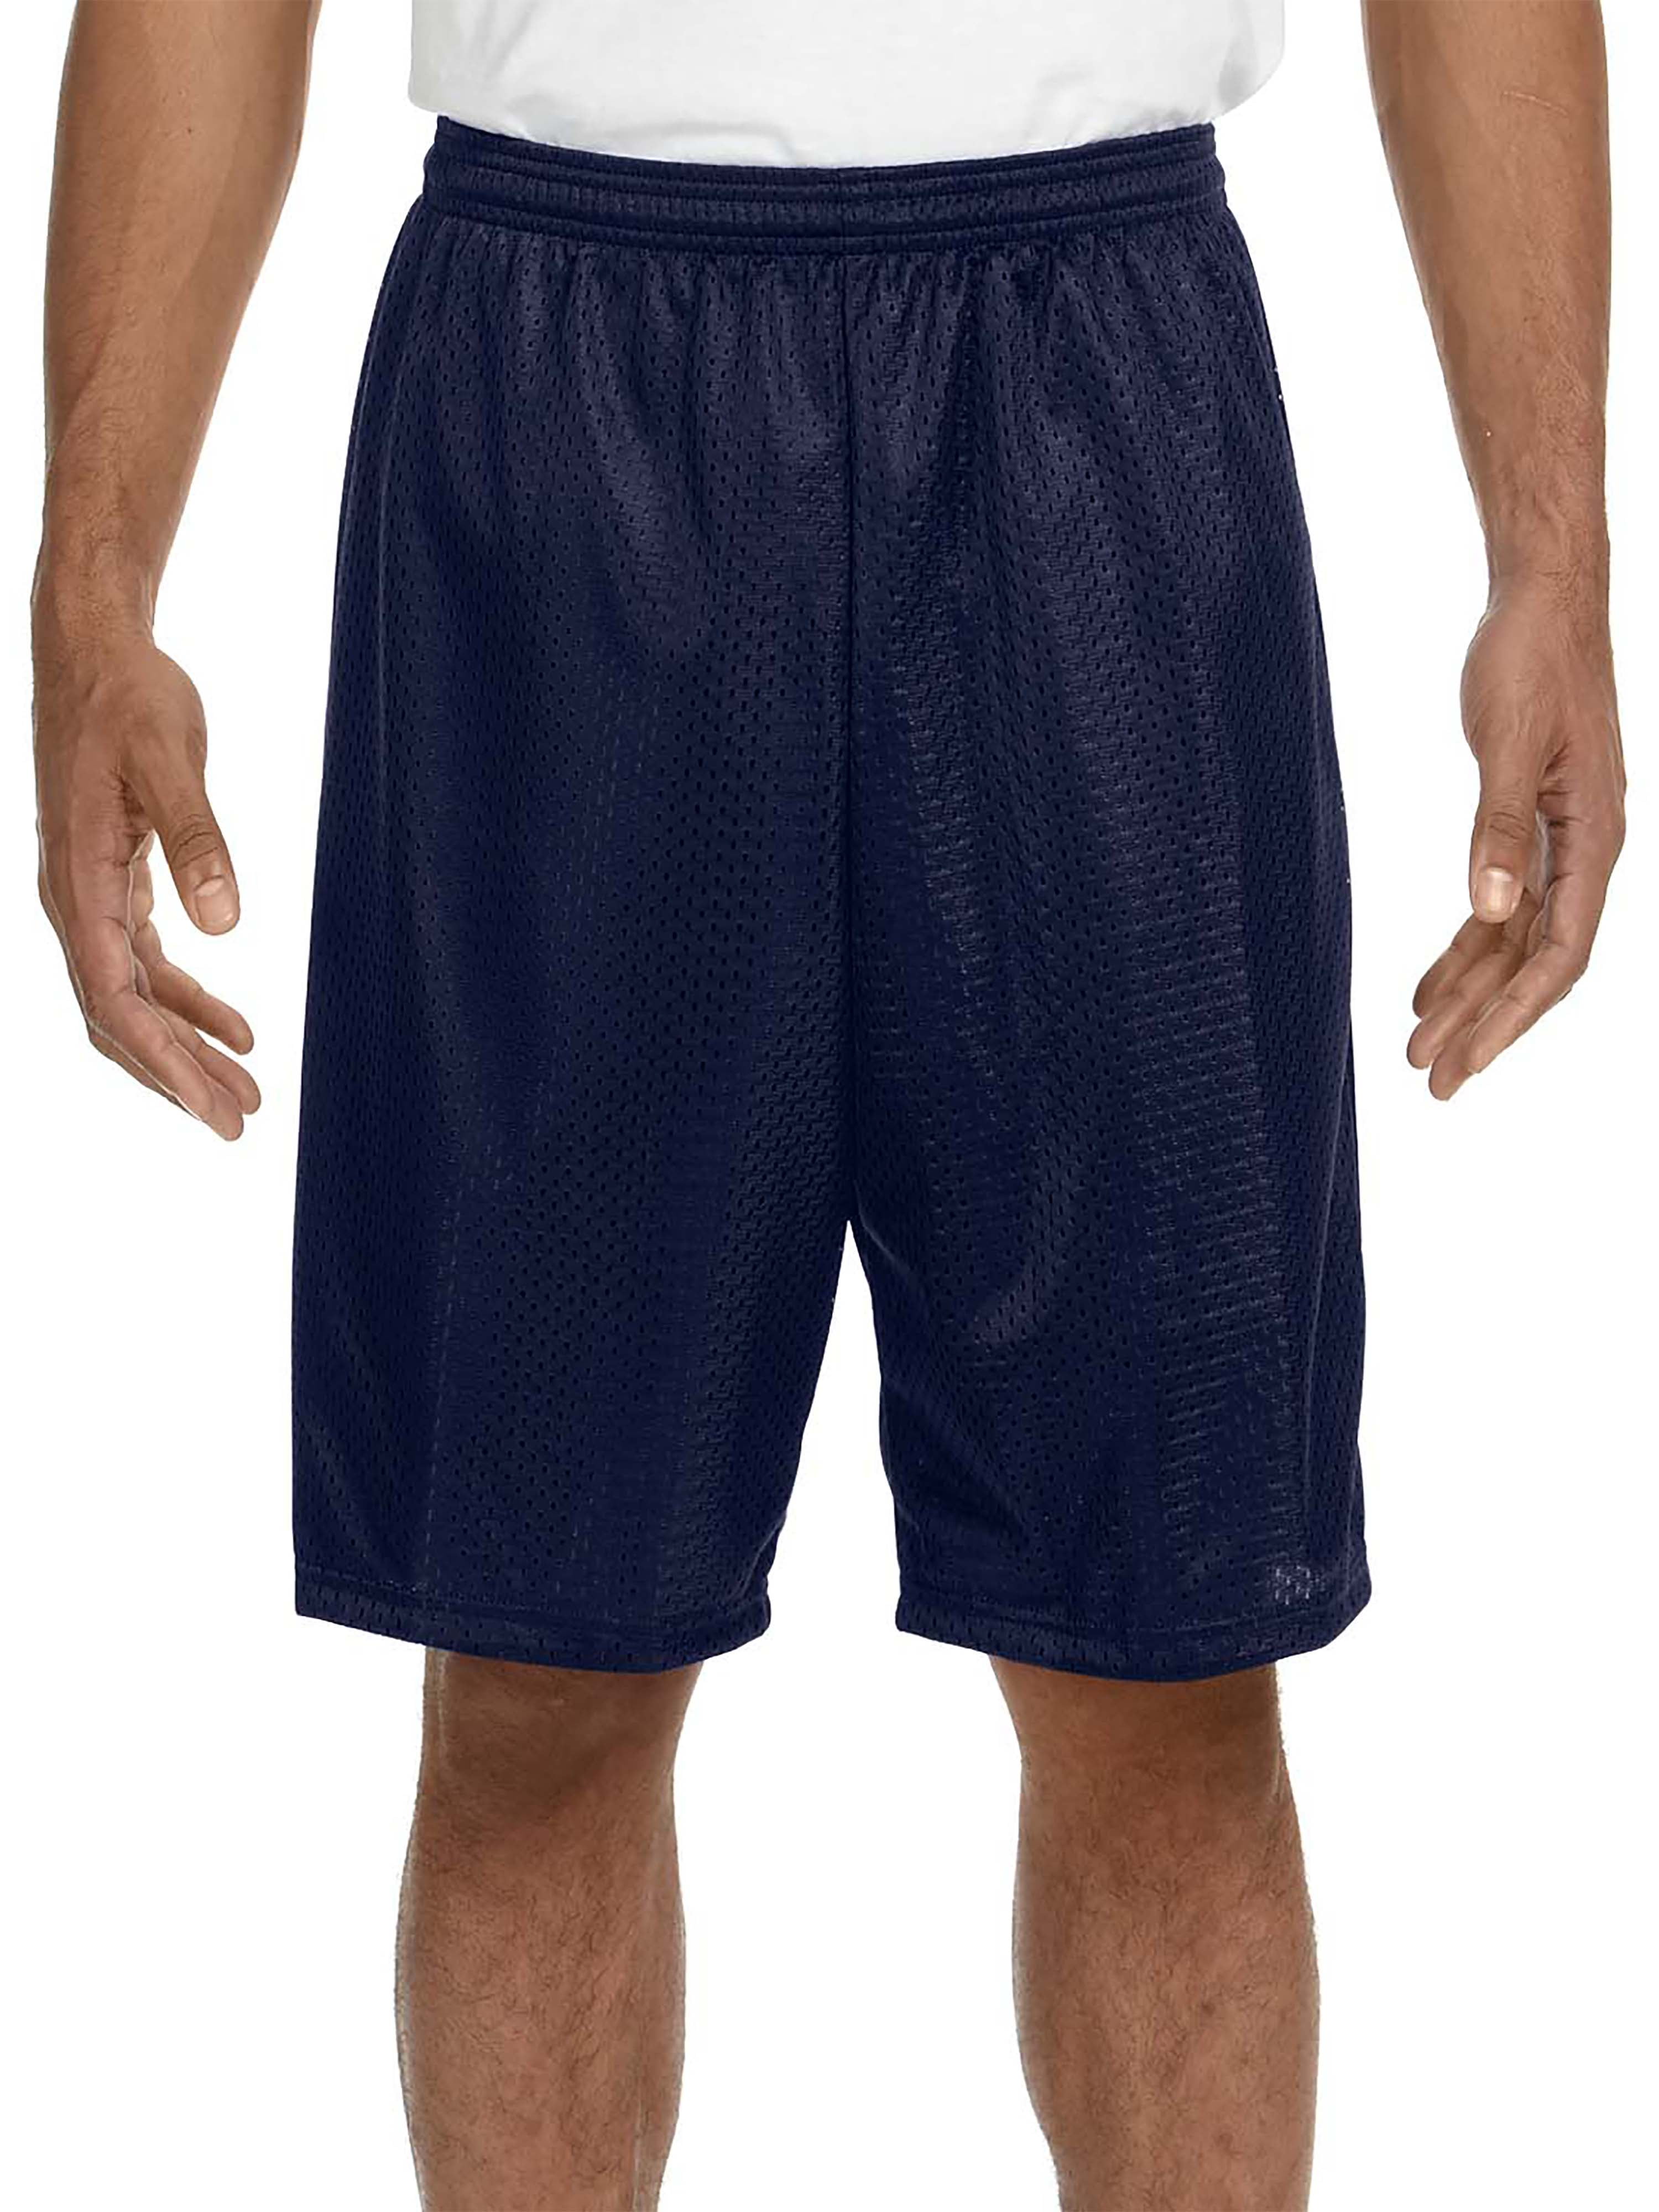 THE GYM PEOPLE Men's Lounge Shorts with Deep Pockets Loose-fit Jersey  Shorts for Running,Workout,Training, Basketball 